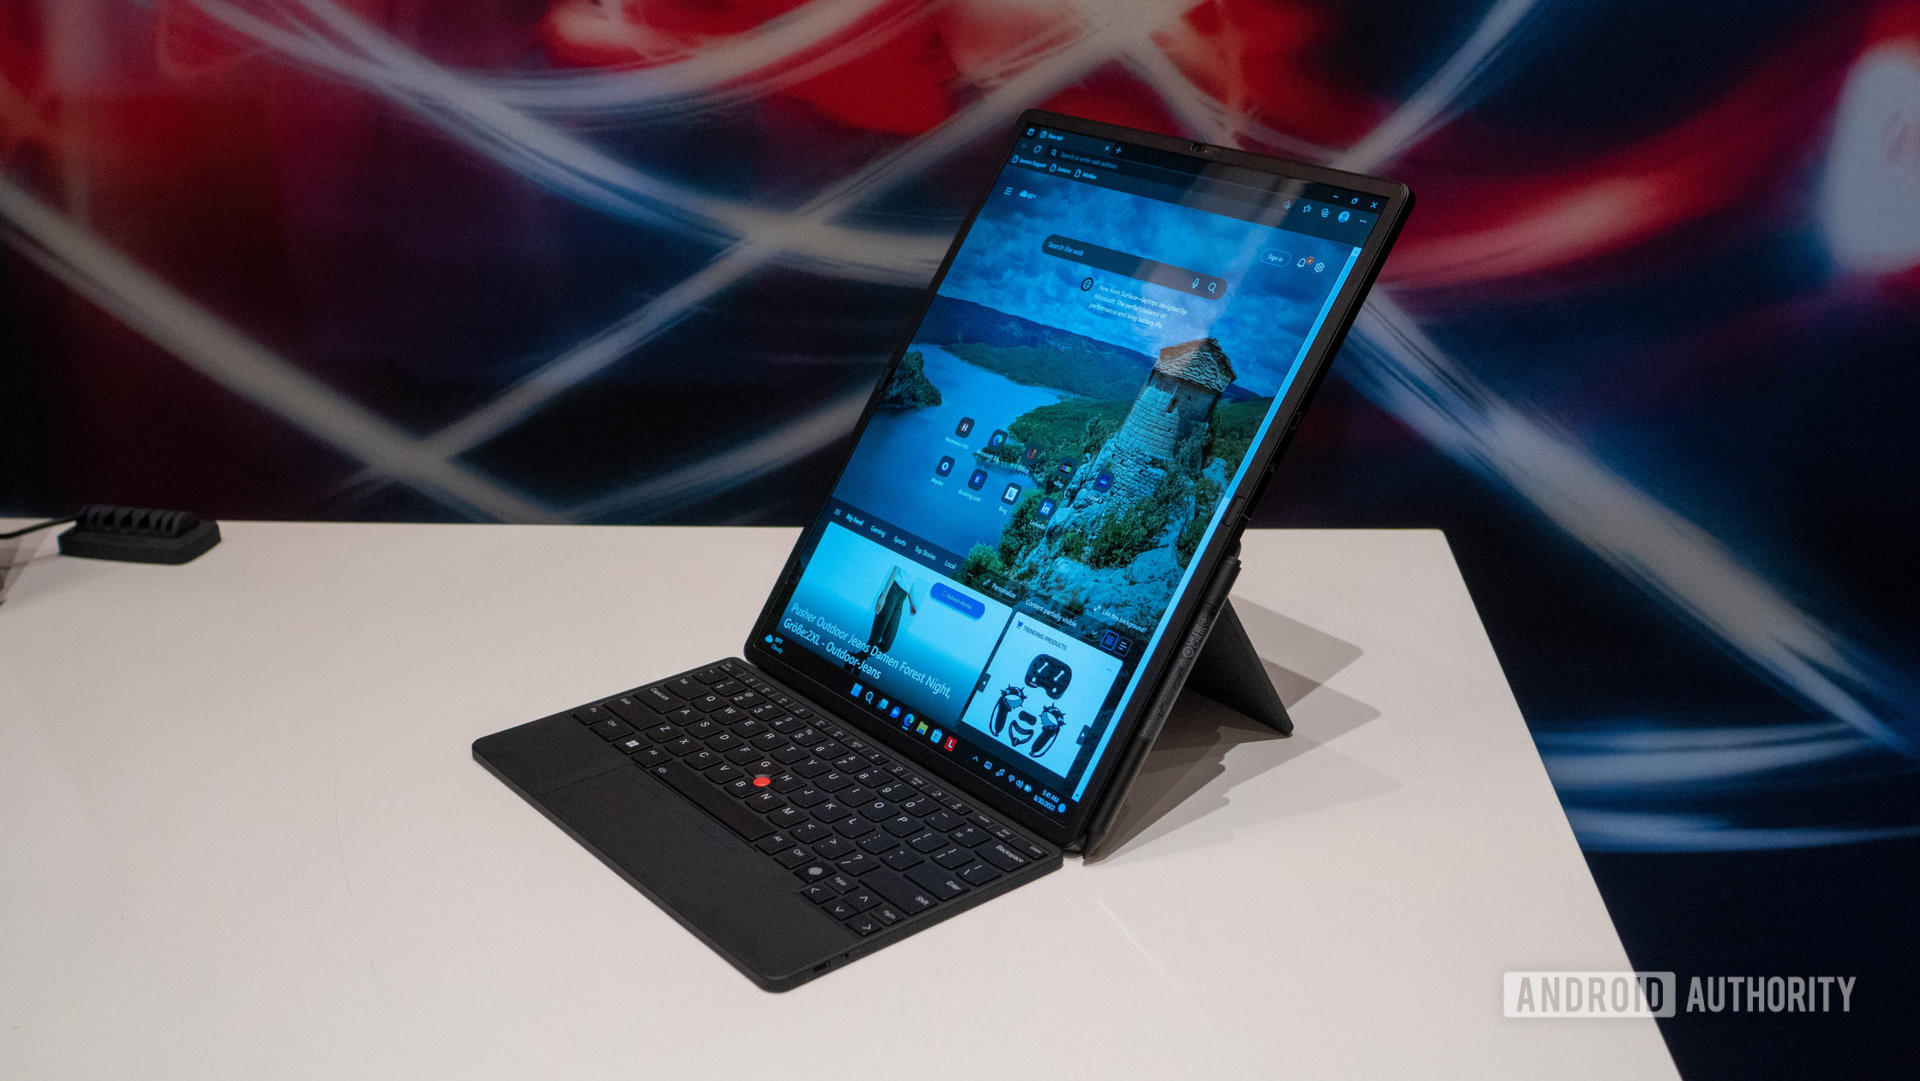 Lenovo X1 Fold (2022) hands-on: The foldable laptop with flex